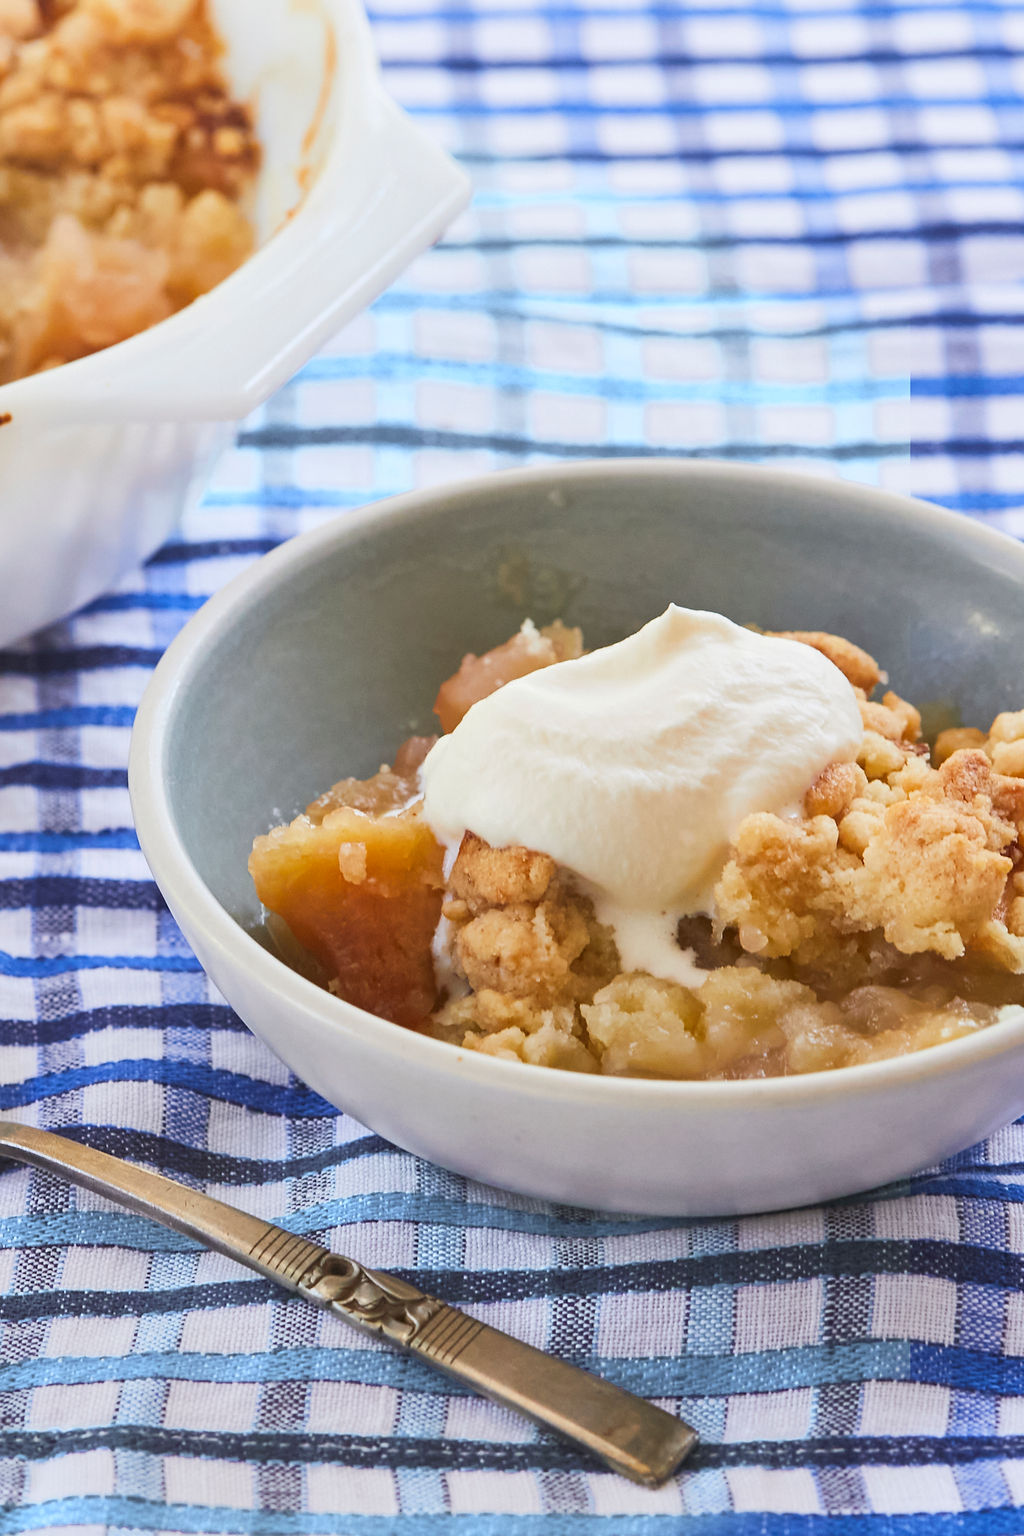 A close-up of a bowl of apple crumble with fresh cream on top.